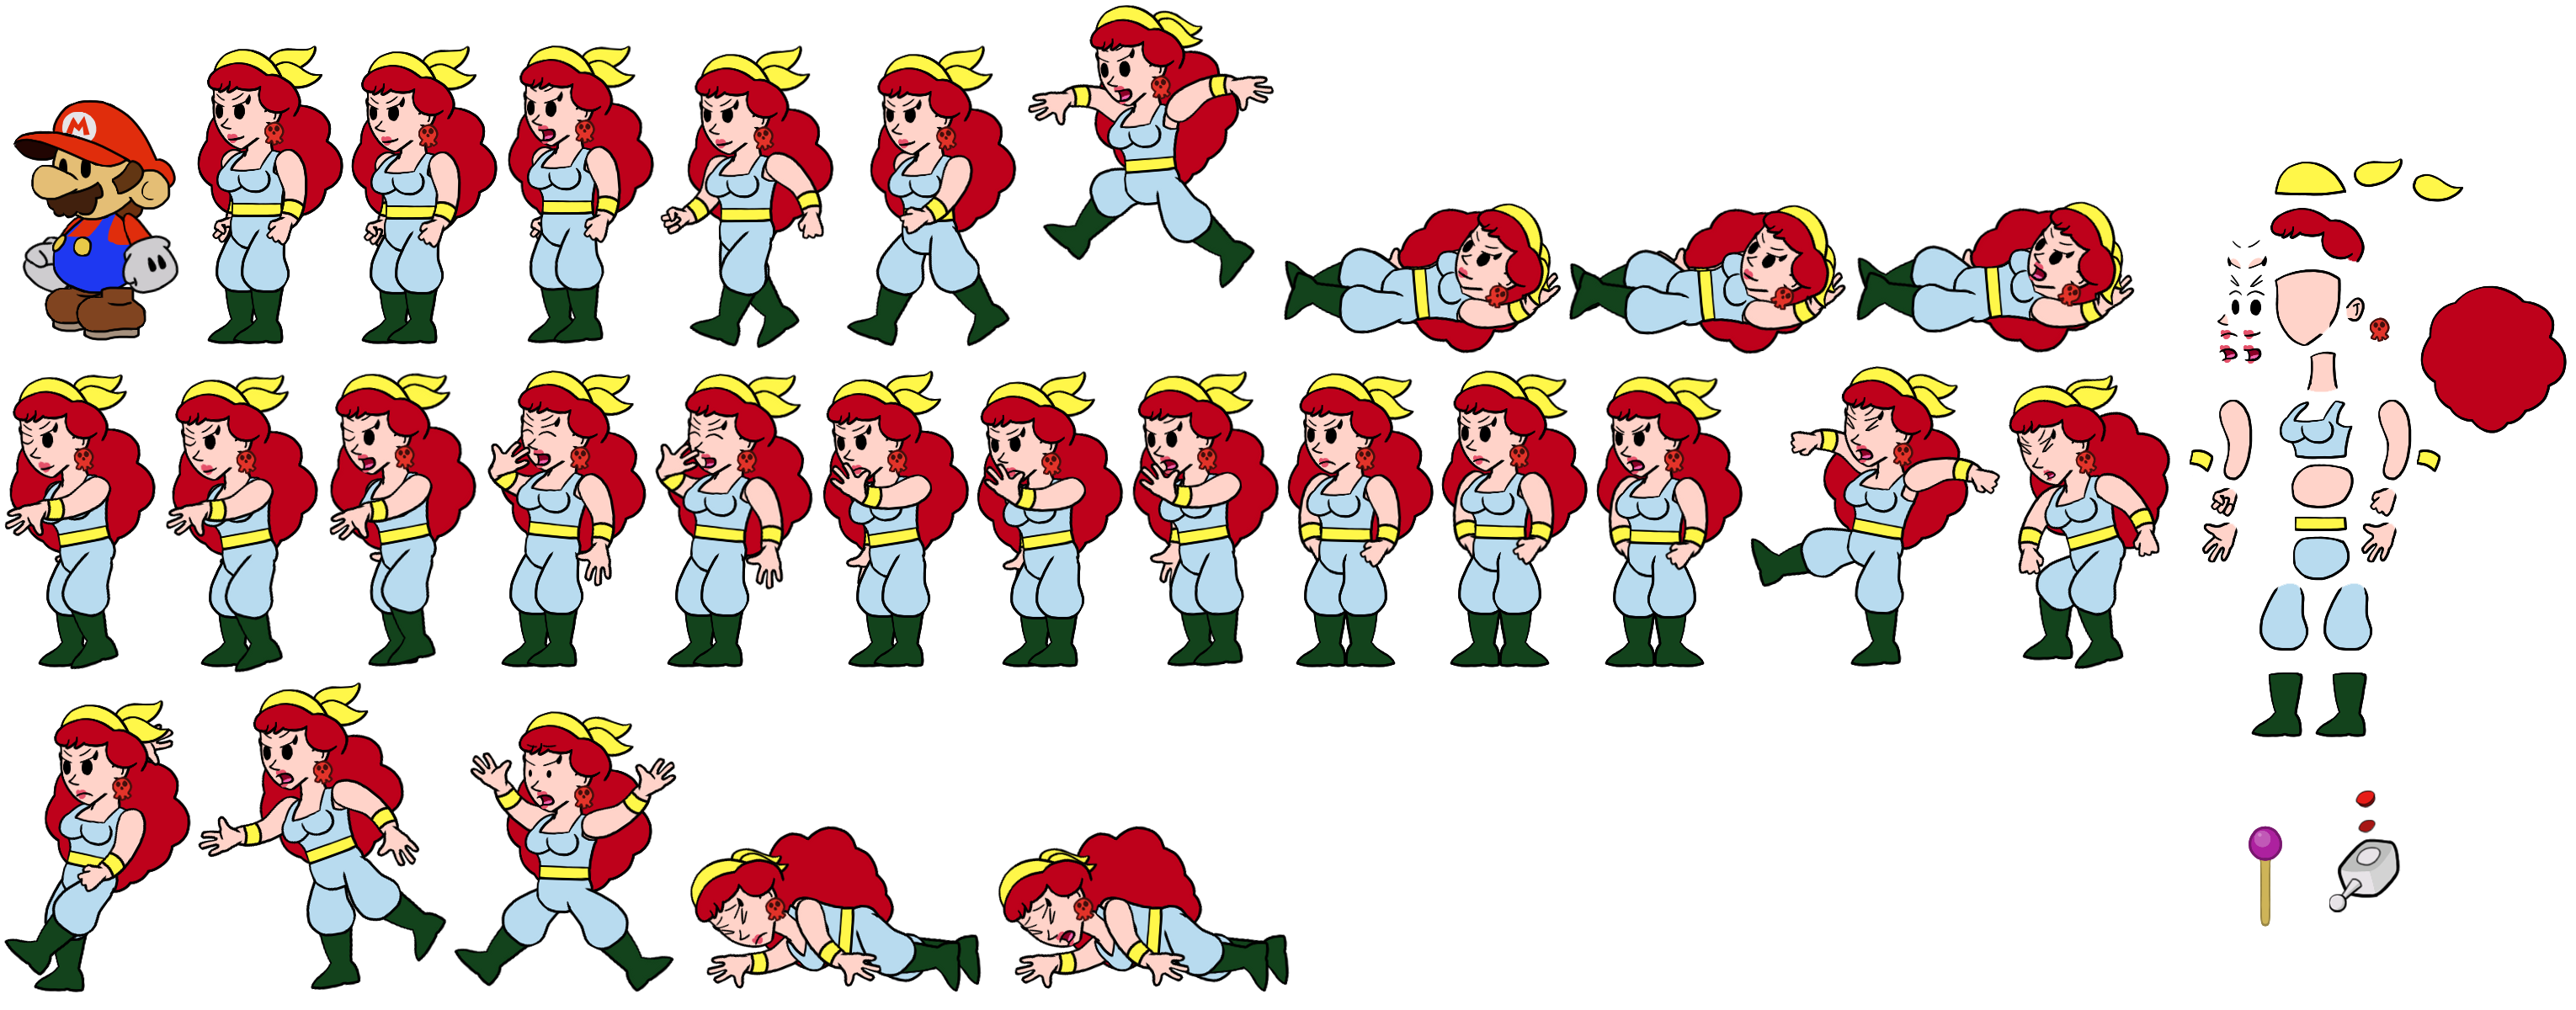 Wario Customs - Captain Syrup (Paper Mario-Style, Classic)